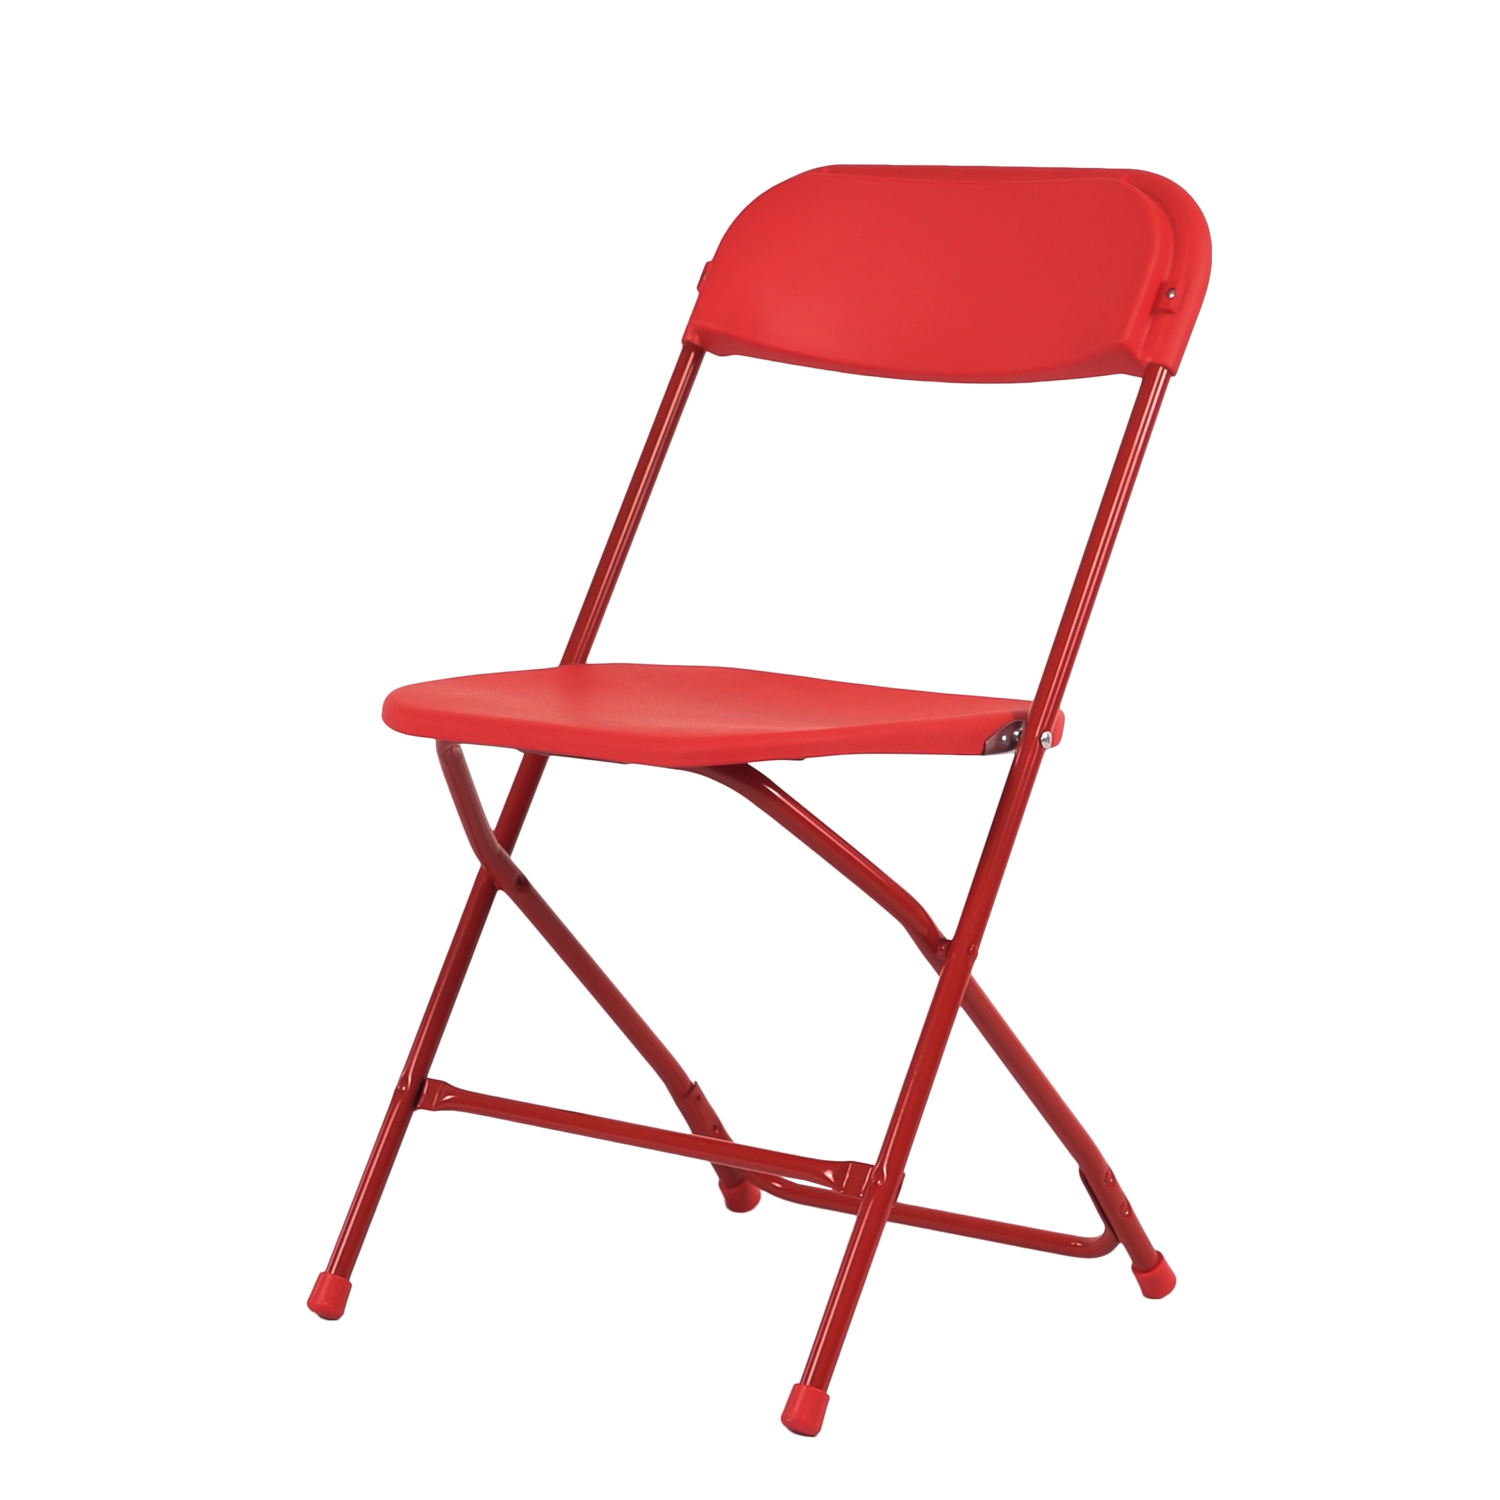 MoNiBloom 10pcs Plastic Foldable Chair, Patio Seat for Wedding Party  Meeting Indoor Outdoor, Red 